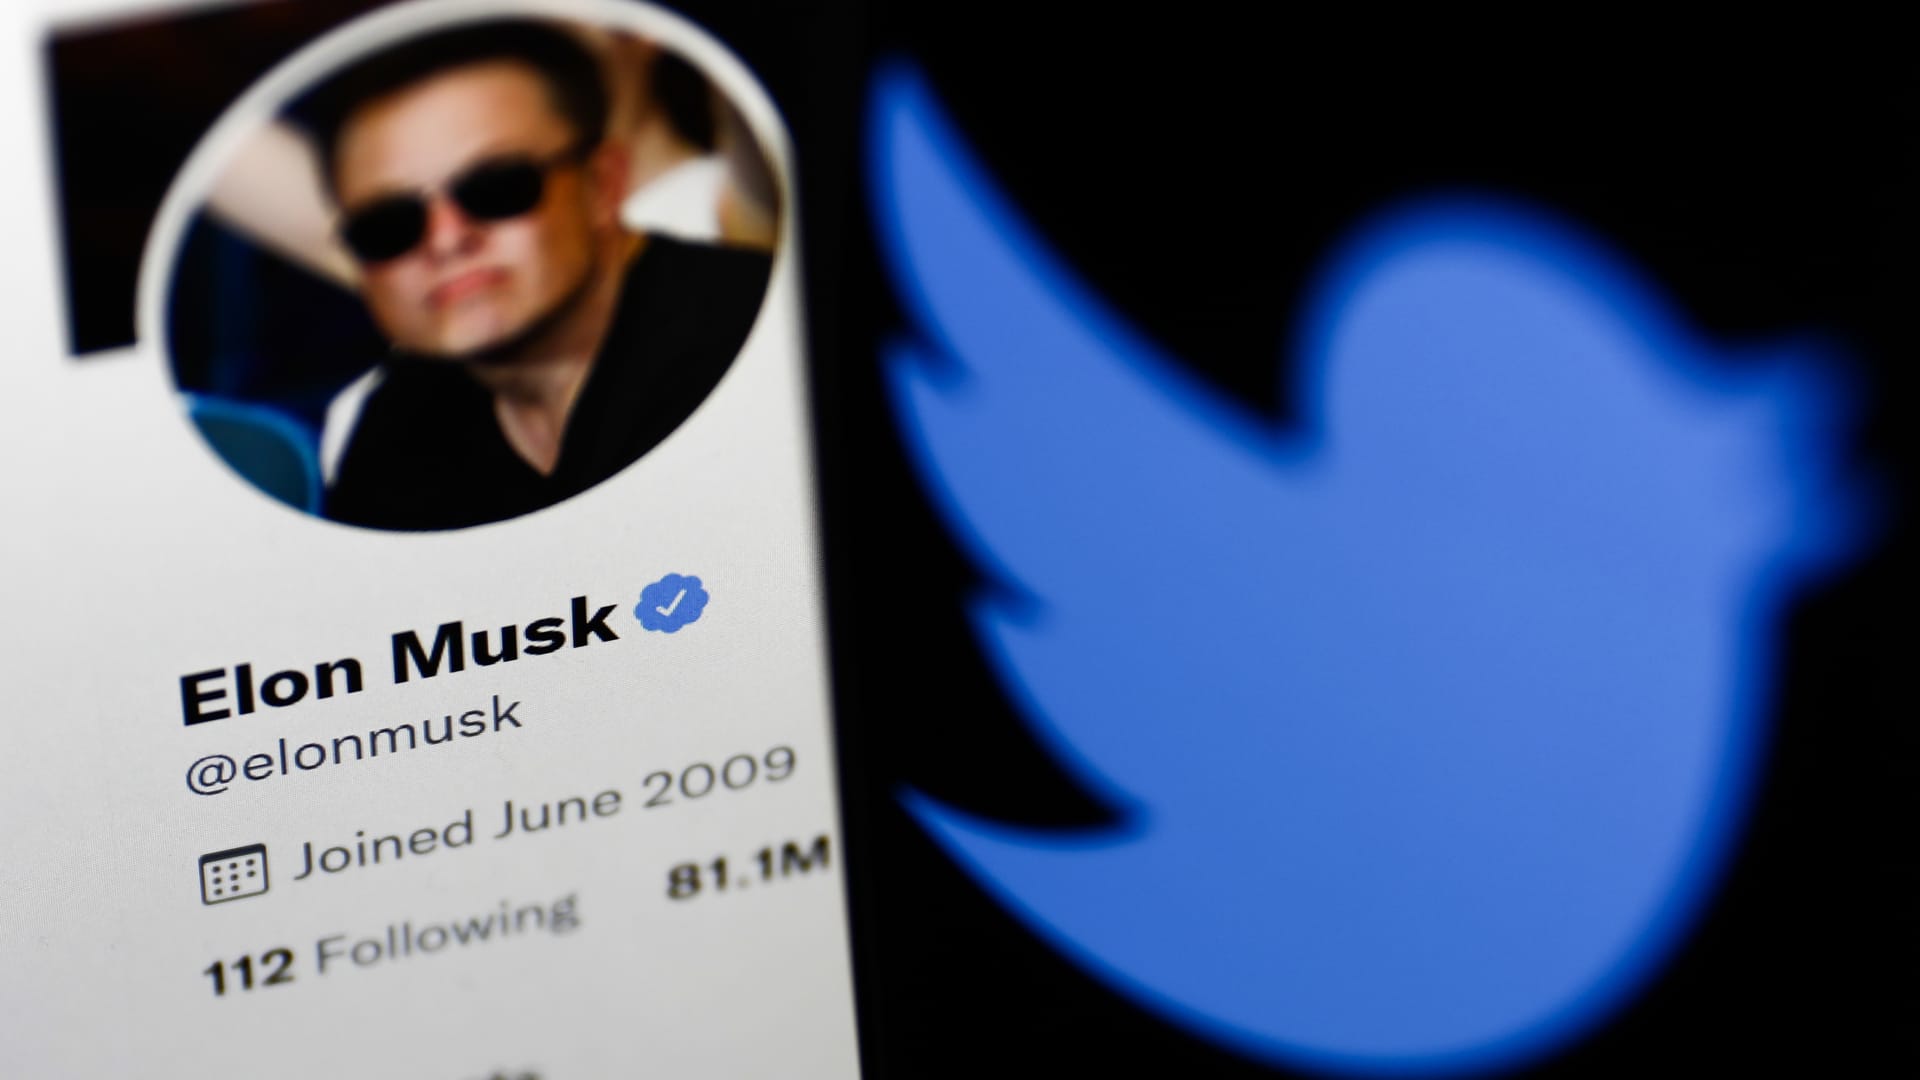 Twitter board adopts ‘poison pill’ after Musk’s $43 billion bid to buy company